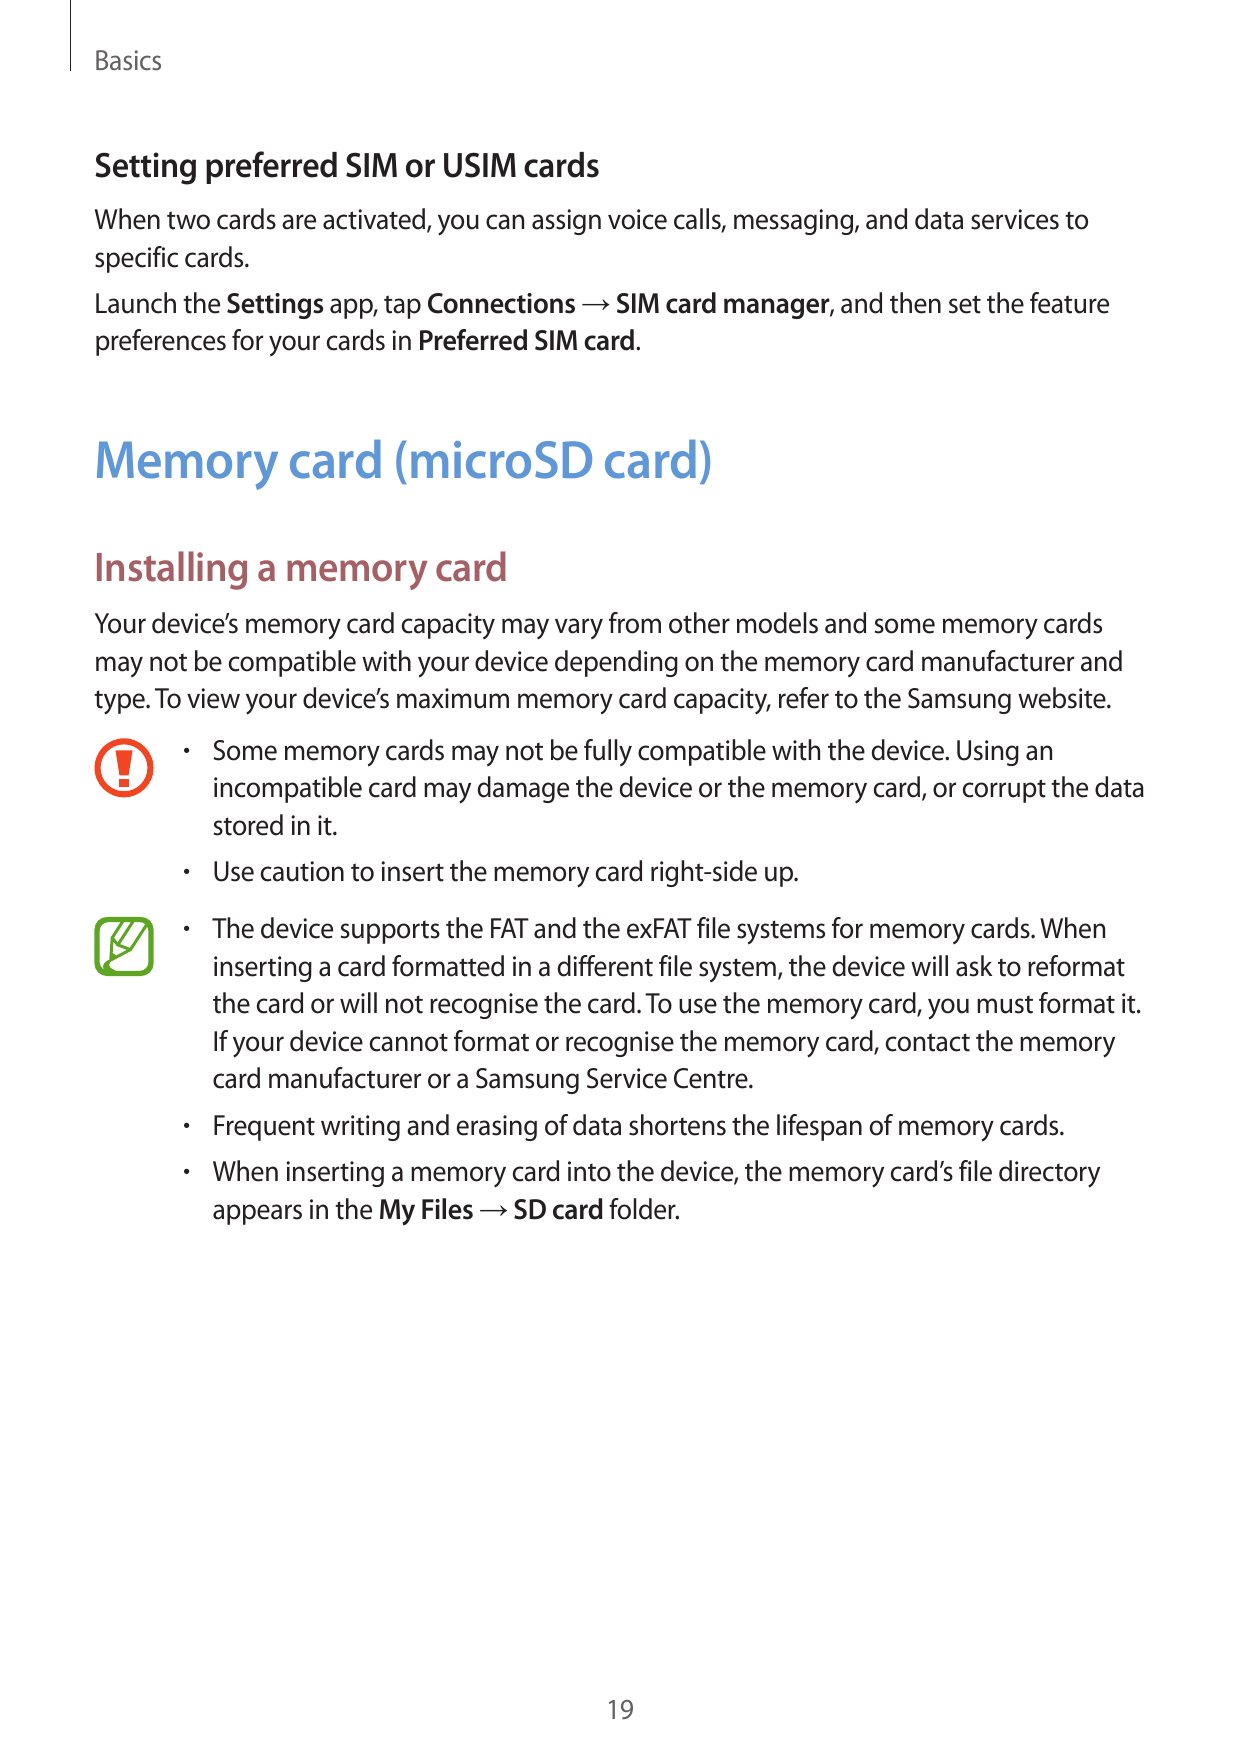 BasicsSetting preferred SIM or USIM cardsWhen two cards are activated, you can assign voice calls, messaging, and data services 